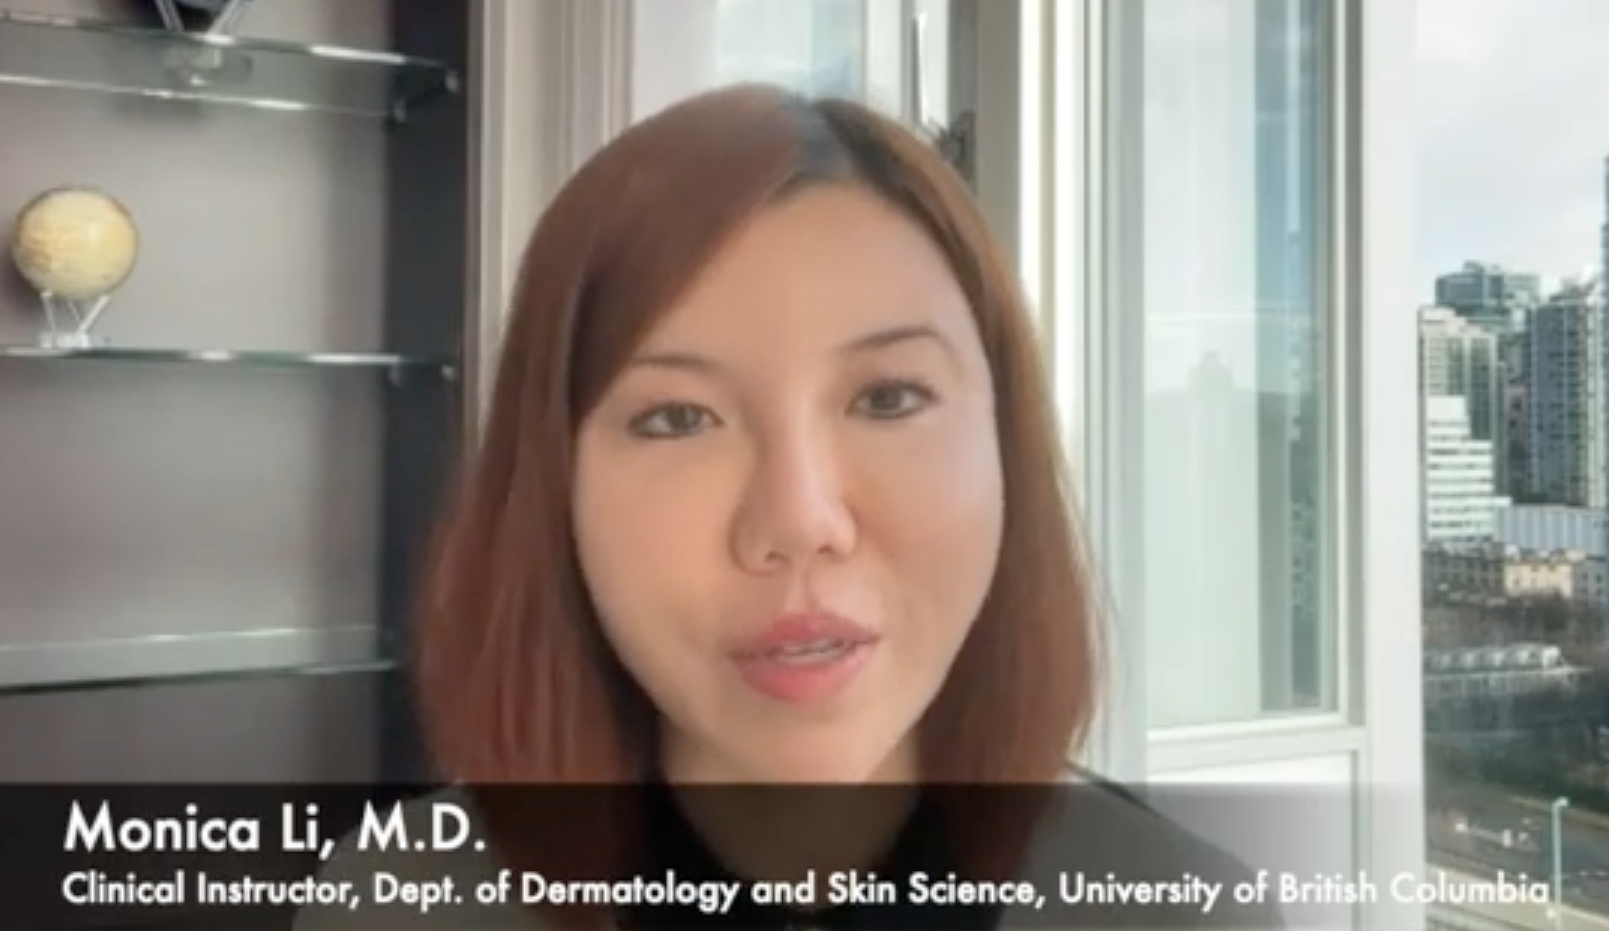 Monica Li, M.D., Discusses Advances in Microneedling Techniques at AAD Annual Meeting